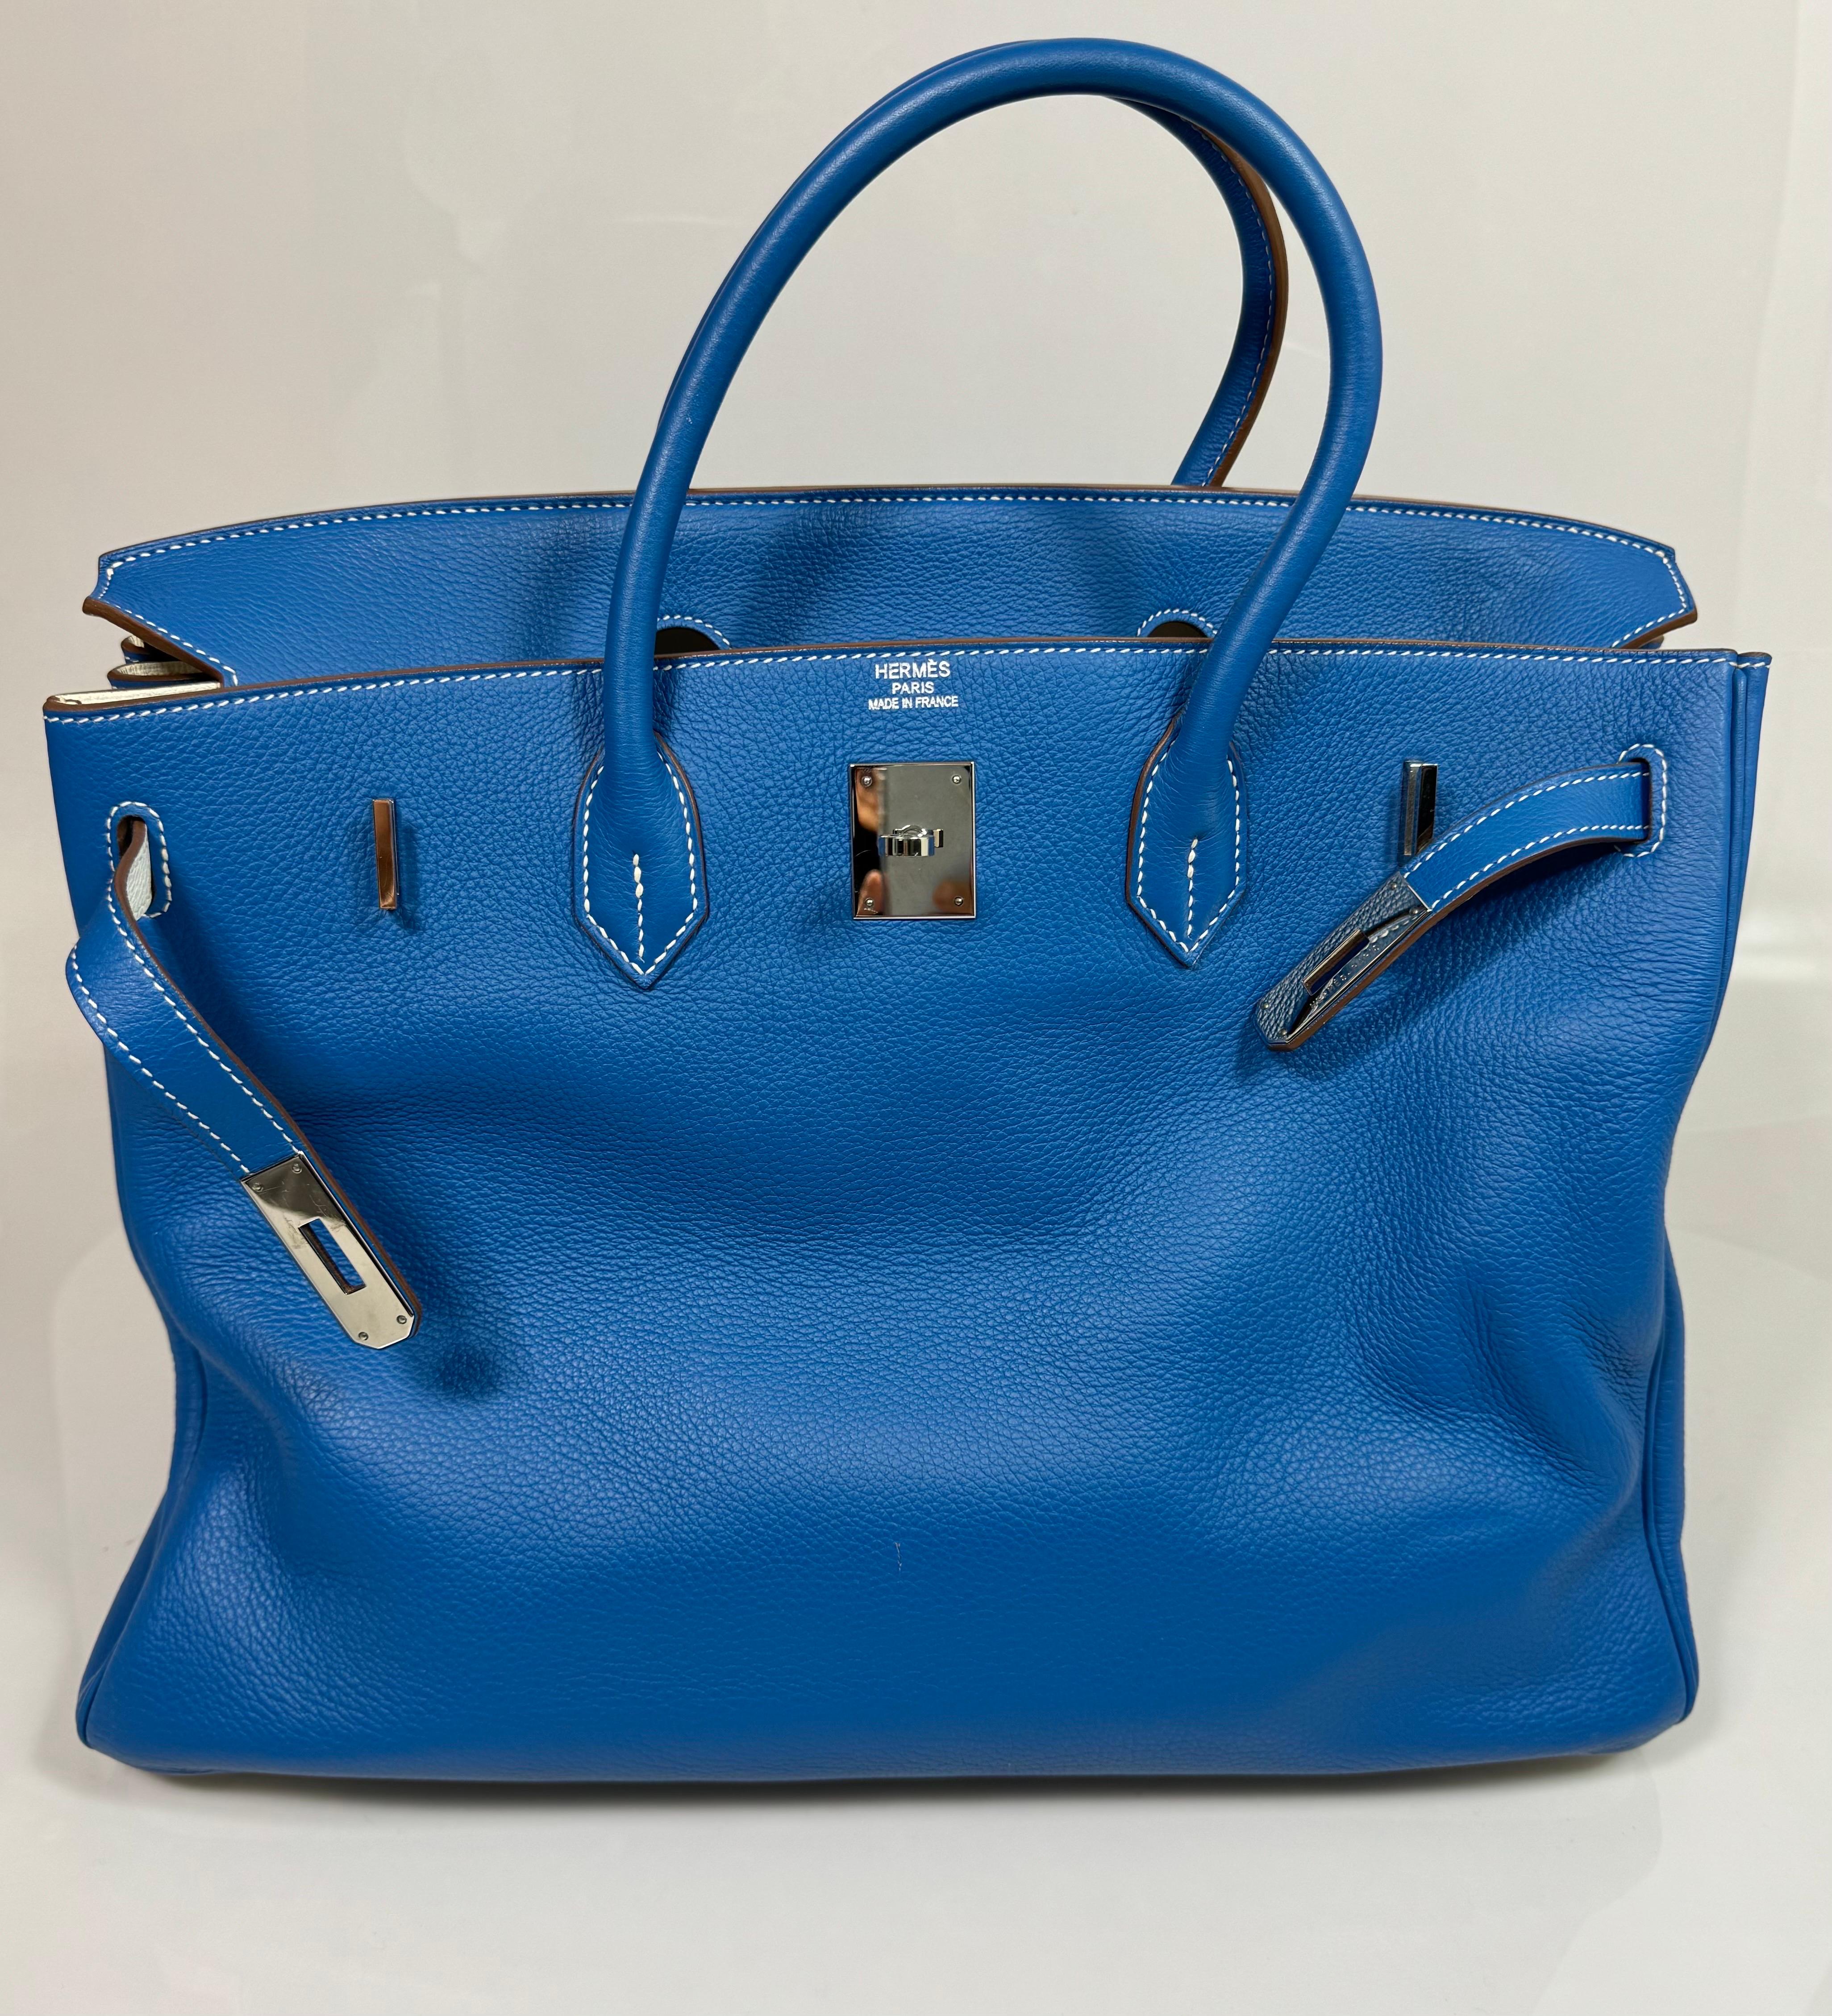 Hermes 40cm  Mykonos Blue and White Clemence Limited edition Birkin-SHW -2011 For Sale 5